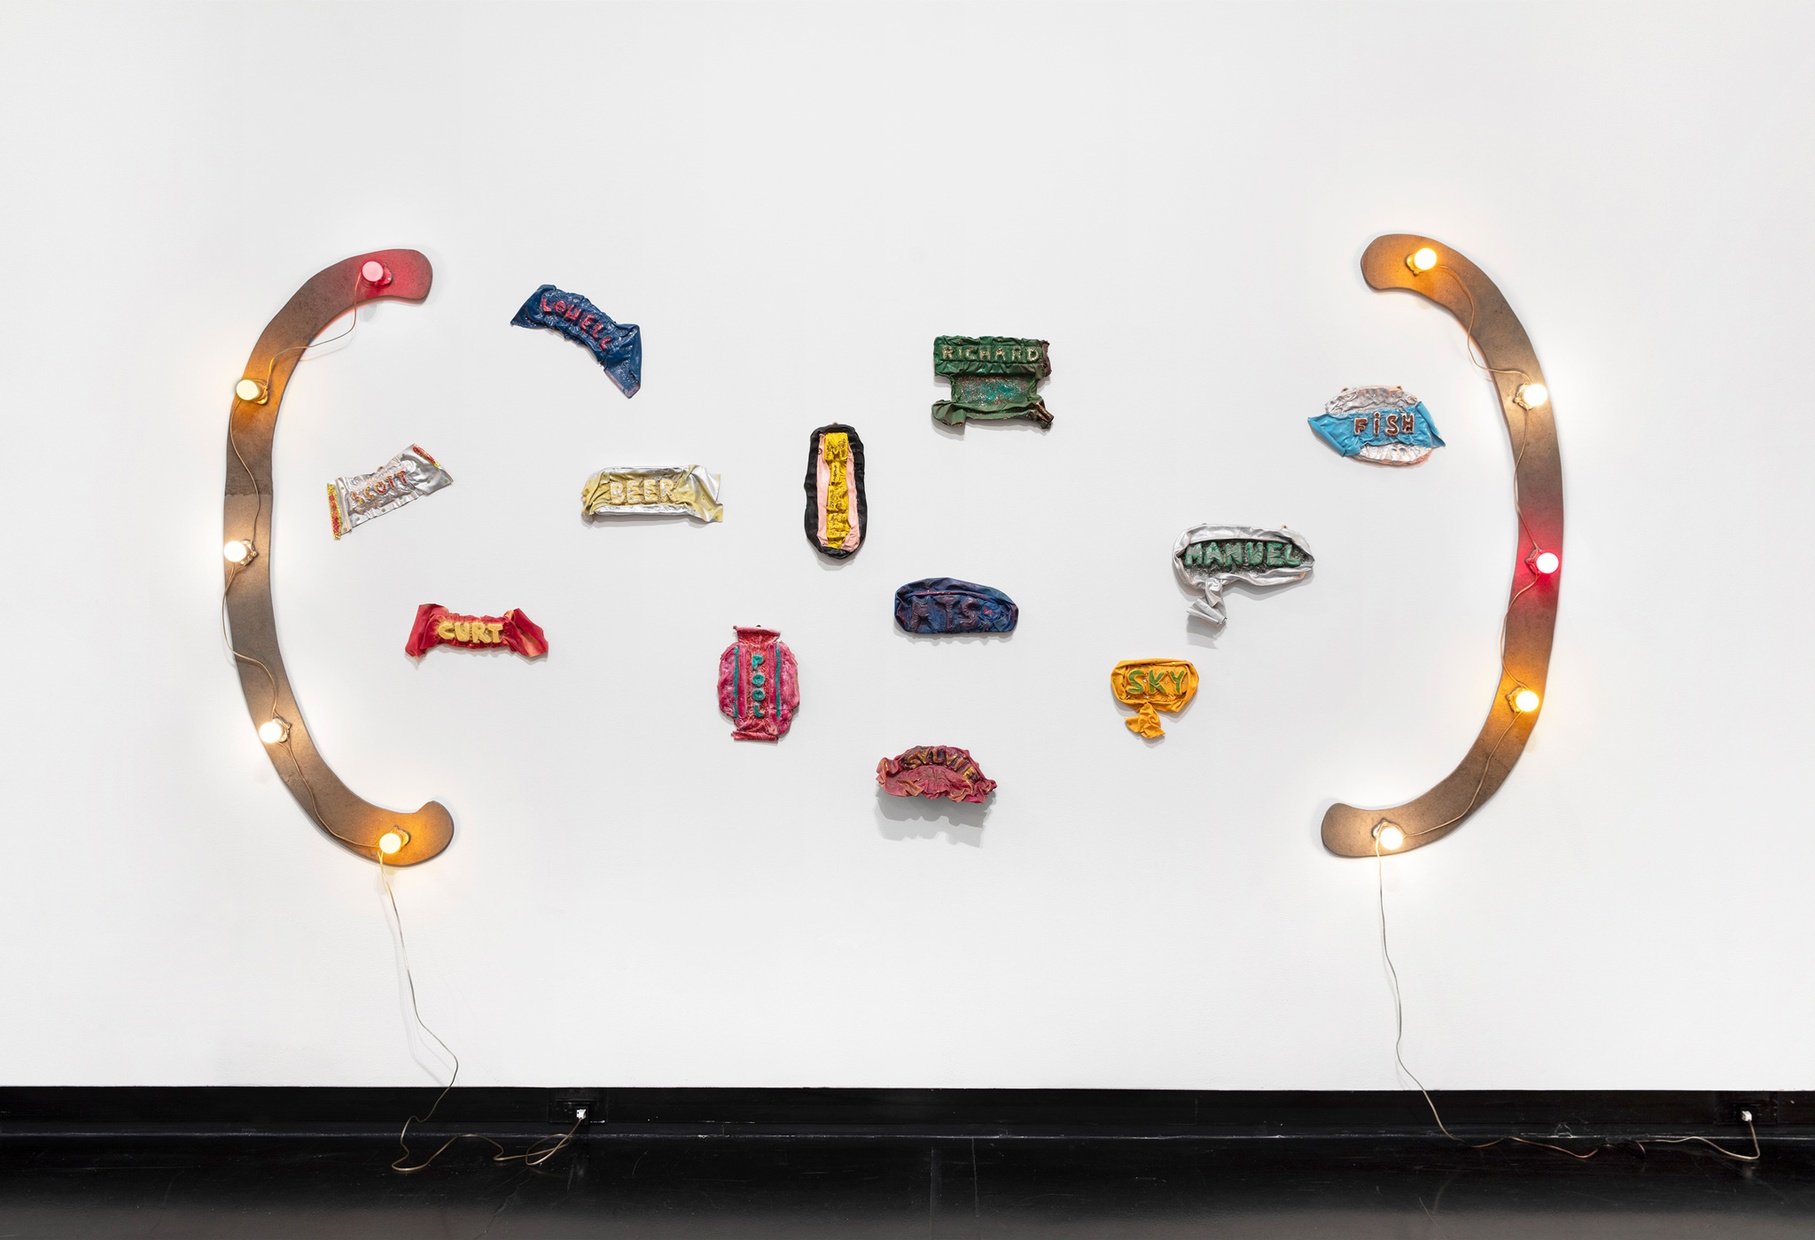 a sculpture, Ree Morton's piece titled "Bozeman, Montana," hangs on a white wall made with enamel, flocking, and glitter on wood and celastic, with bright light bulbs